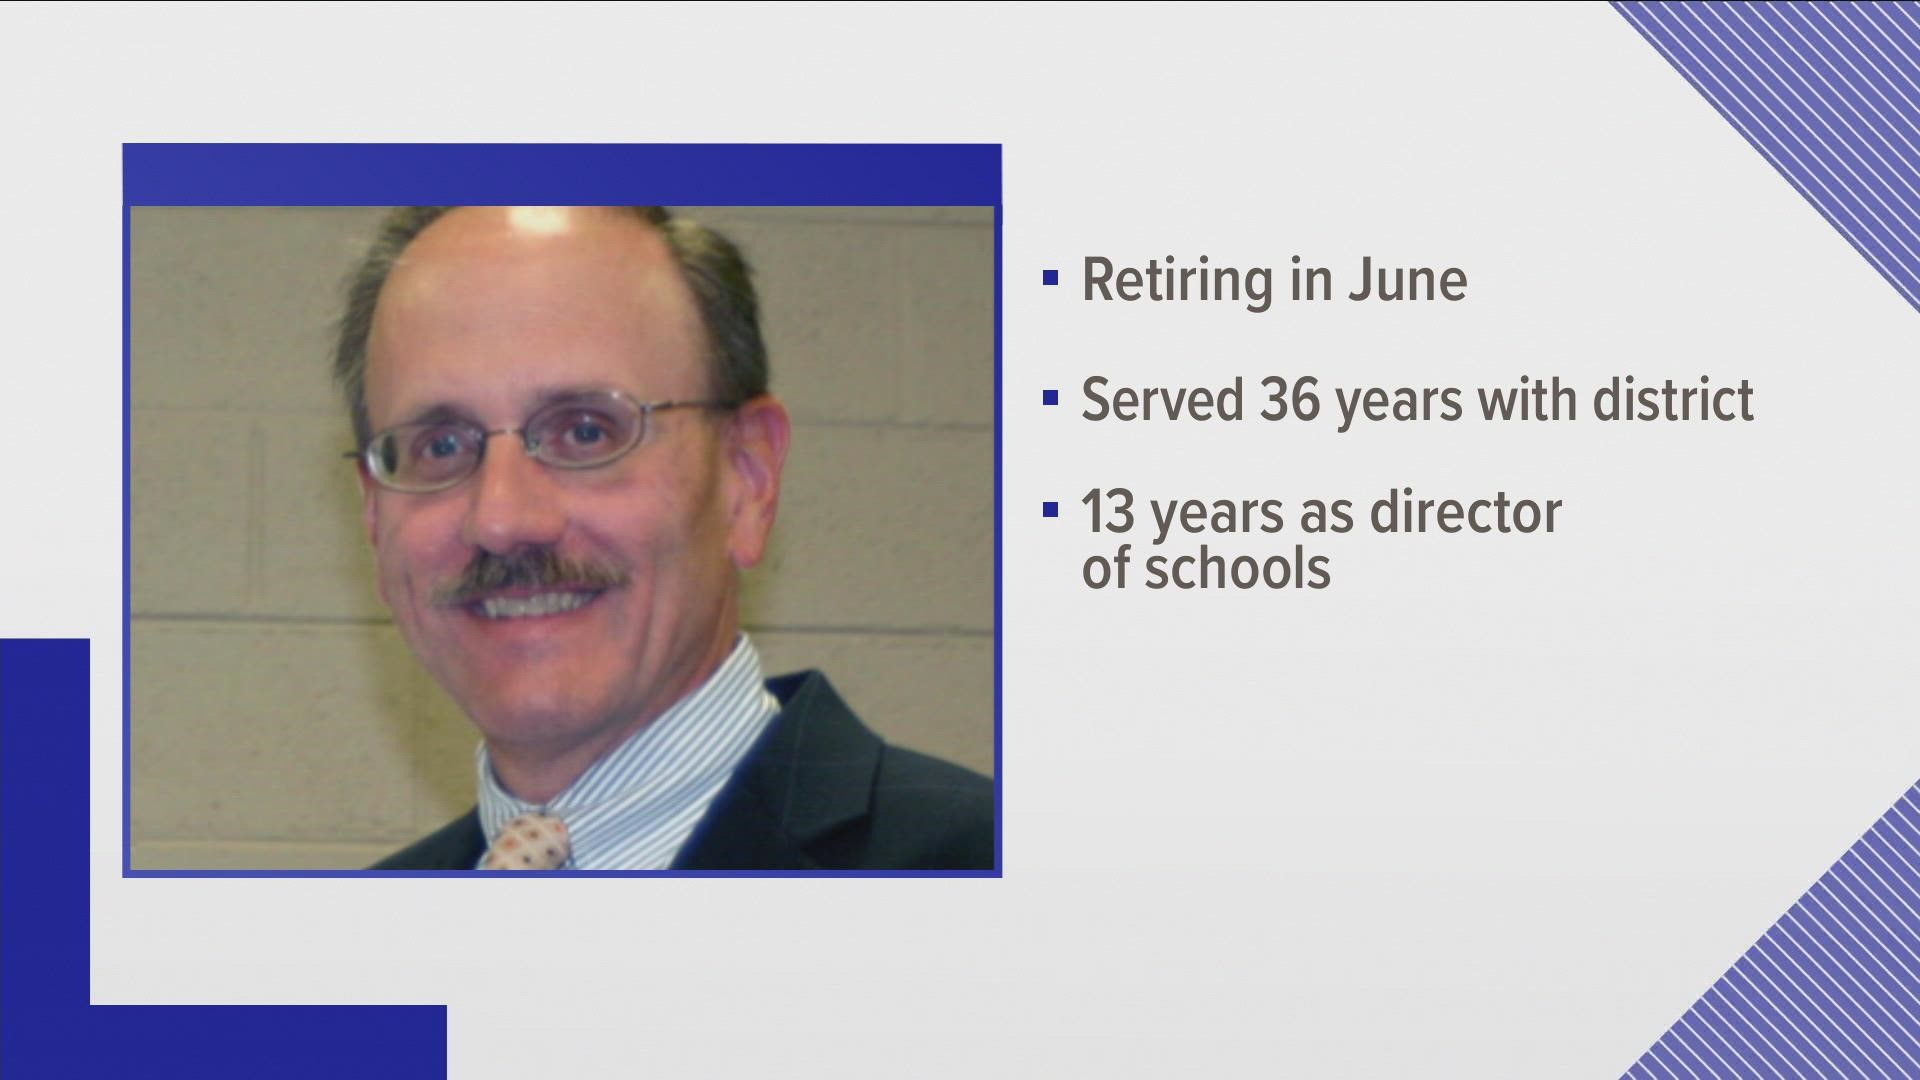 Mr. Britt announced that he planned to retire from BCS after serving as the county's director of schools since 2009.